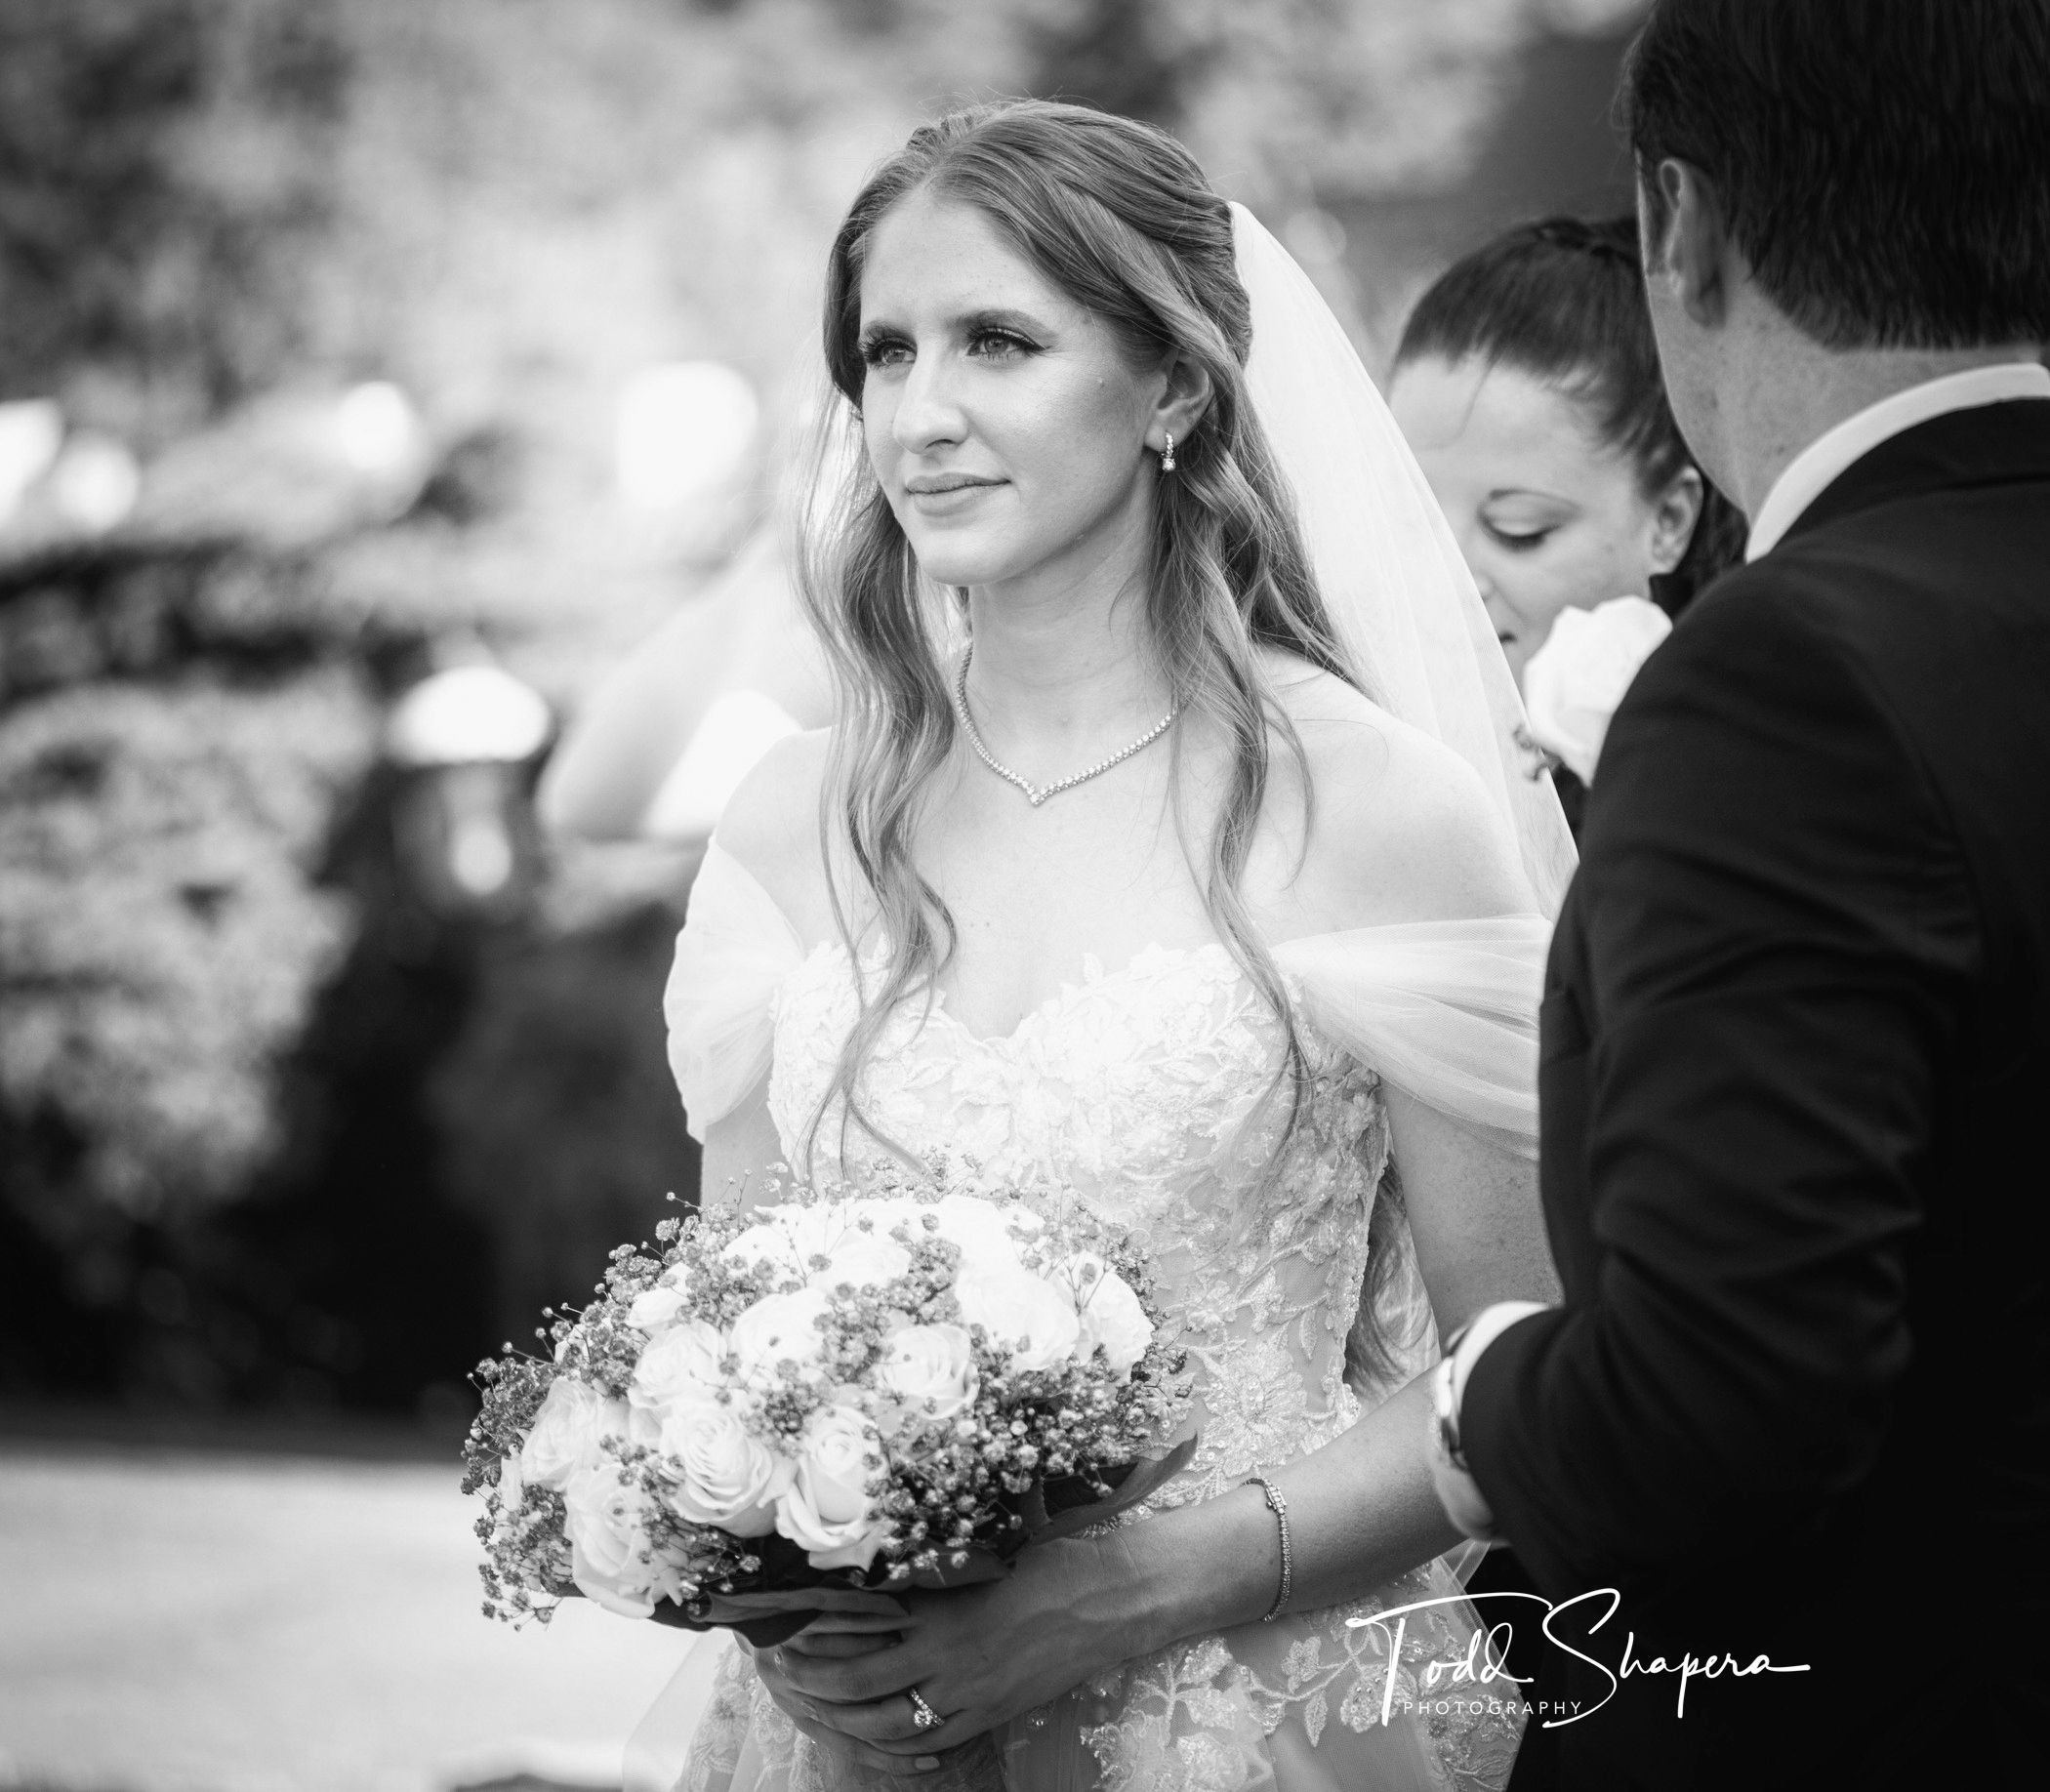 Bride With Her Bouquet In Black and White